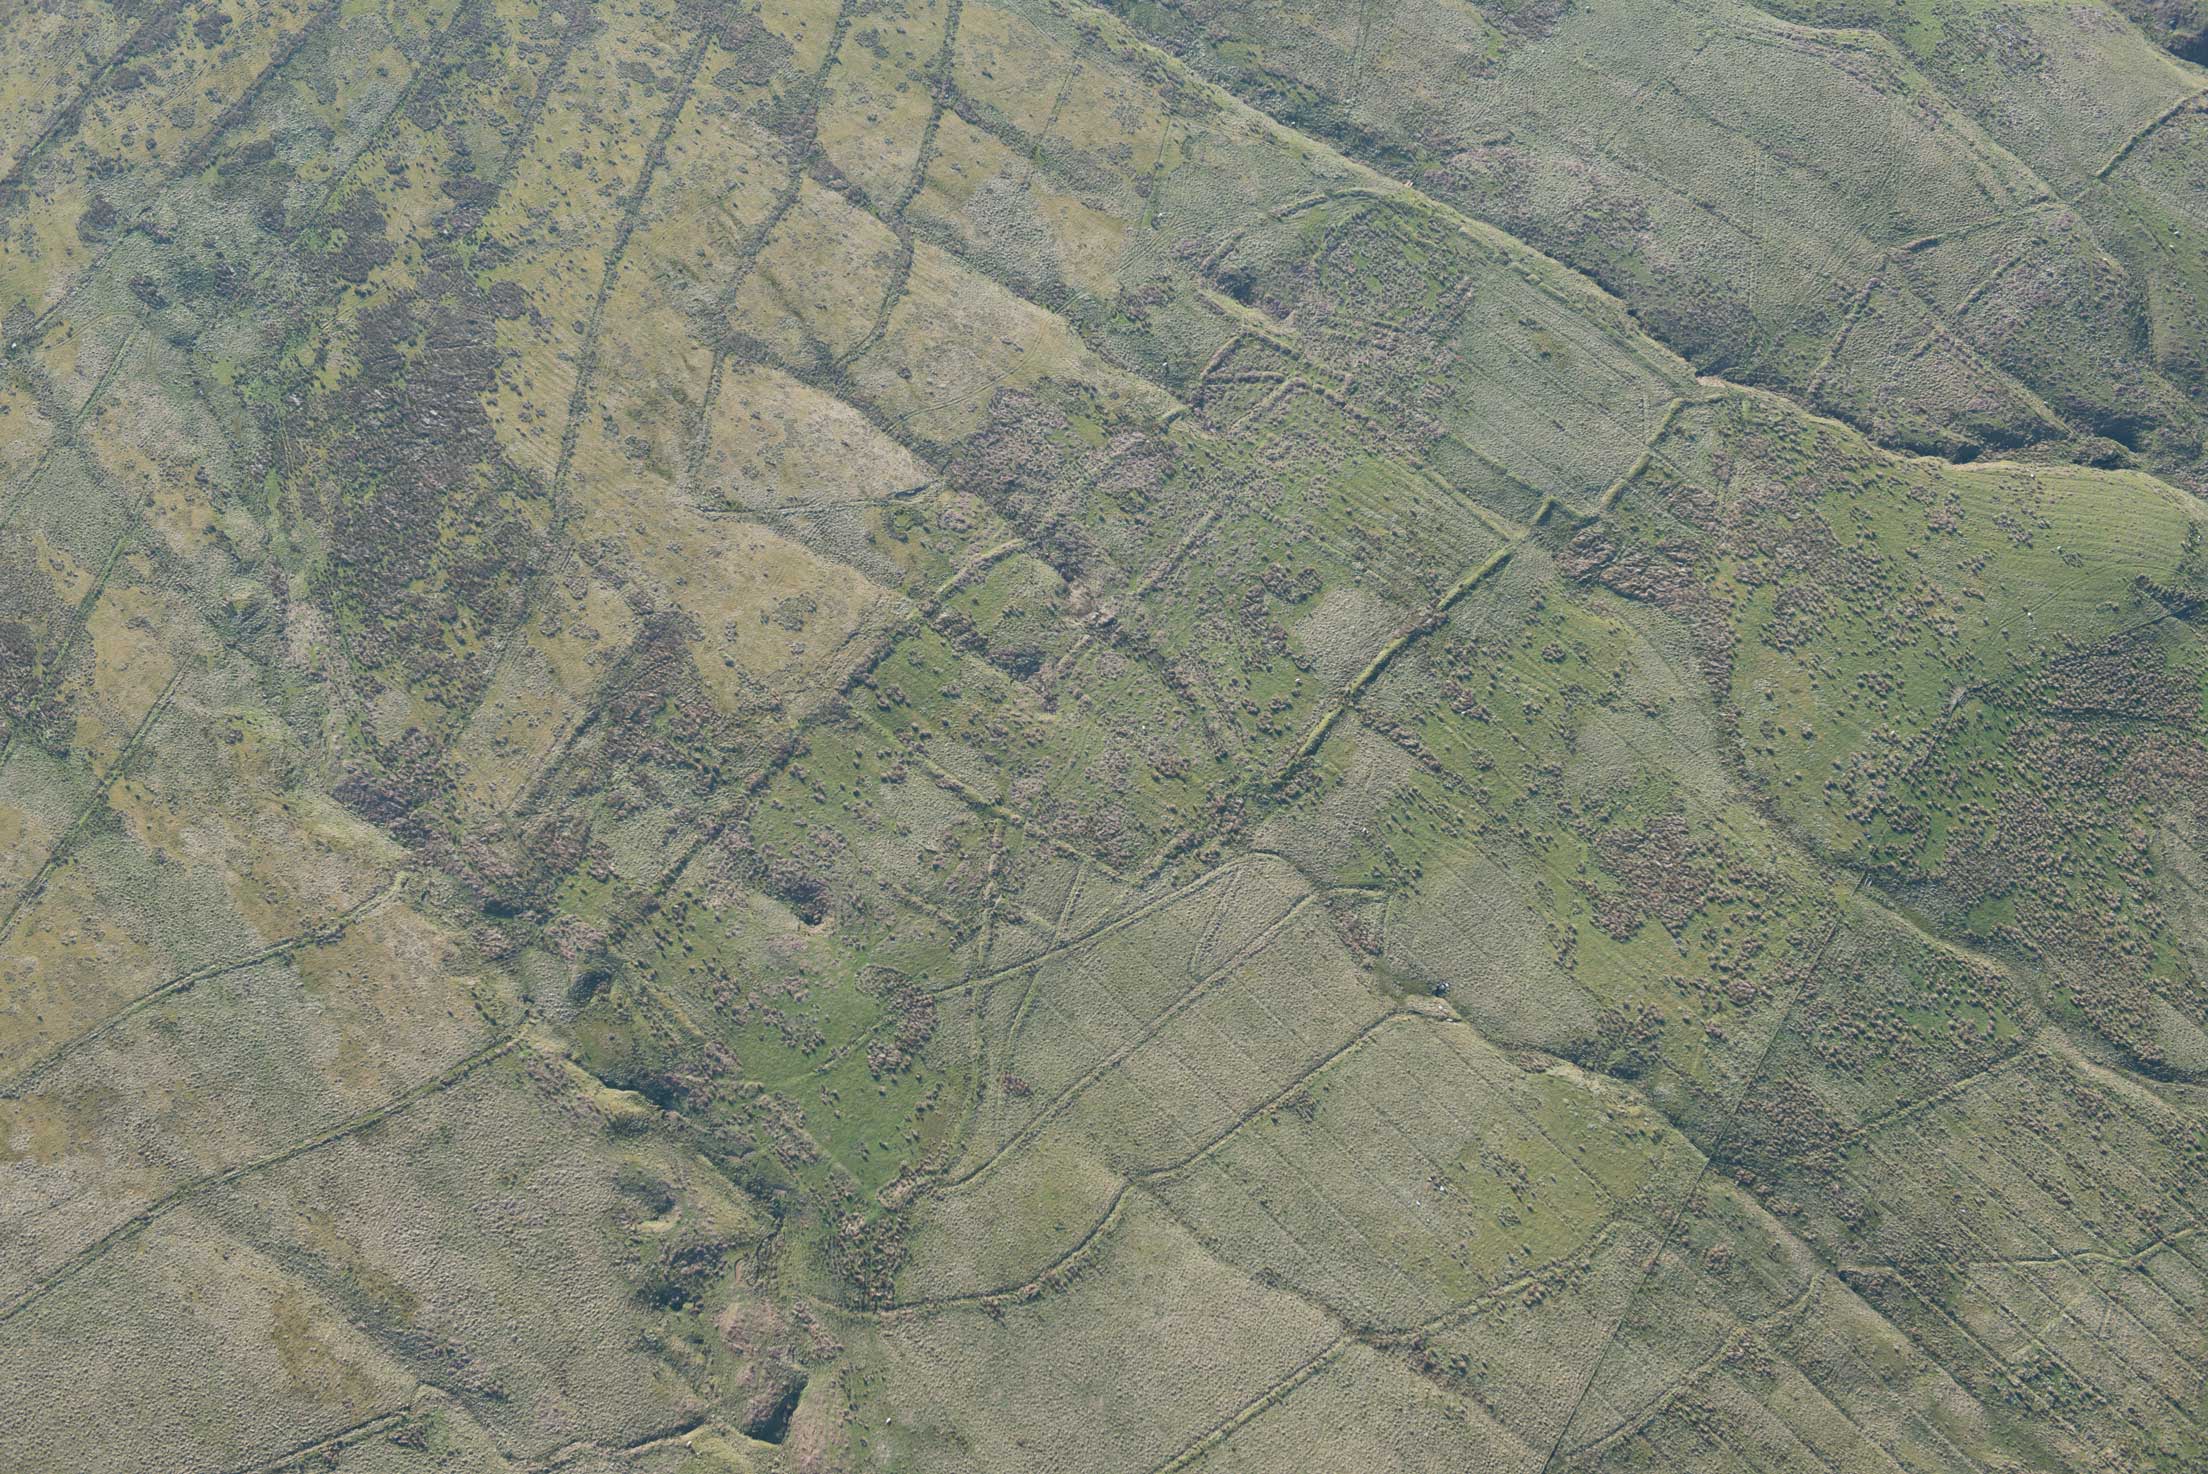 An aerial view of an archaeological landscape in Northern England.